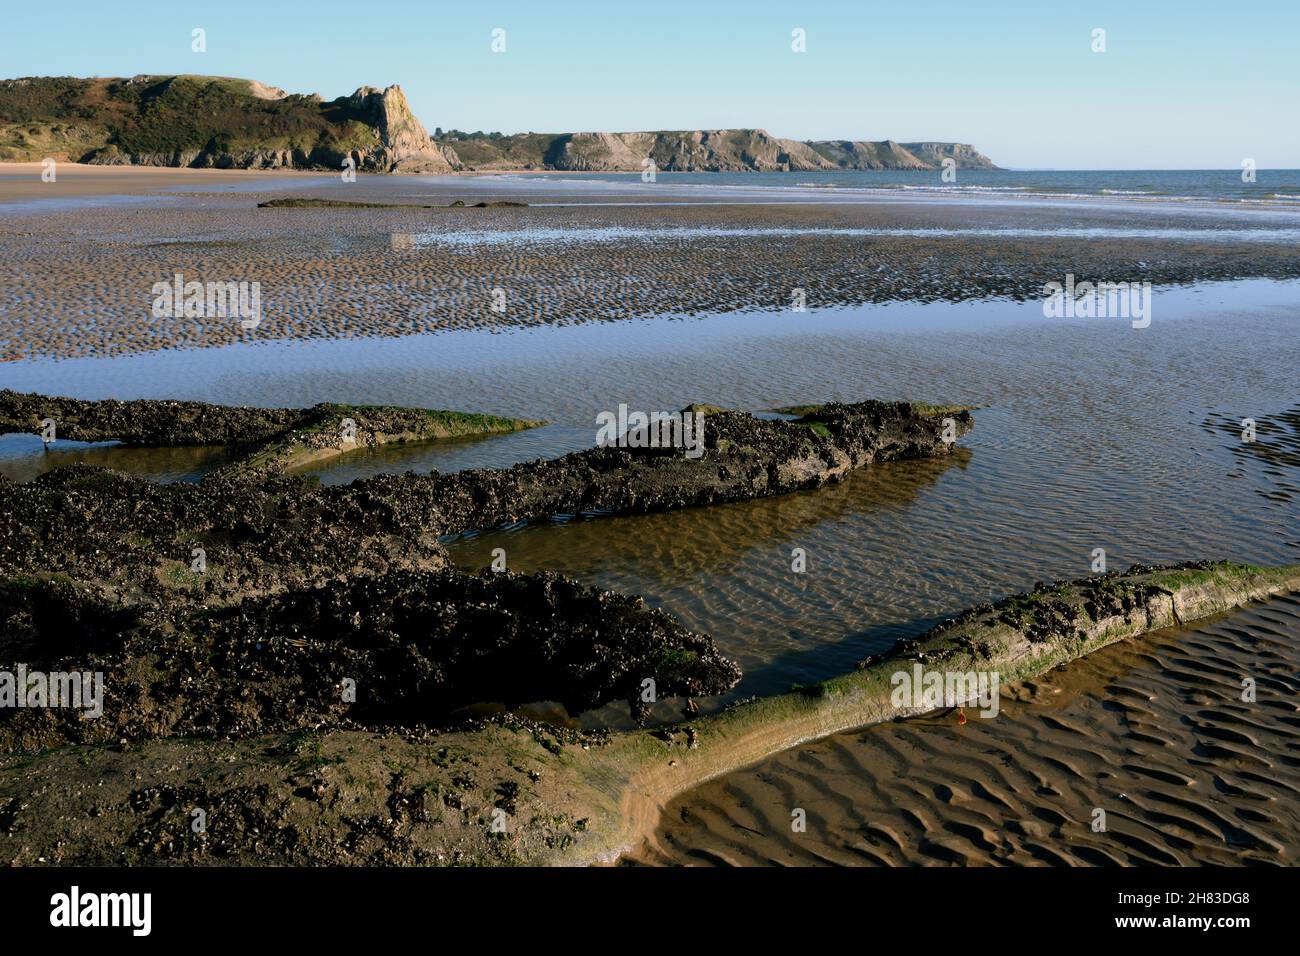 Sunken forest revealed at low tide on Oxwich beach, evidence of sea level rise Stock Photo